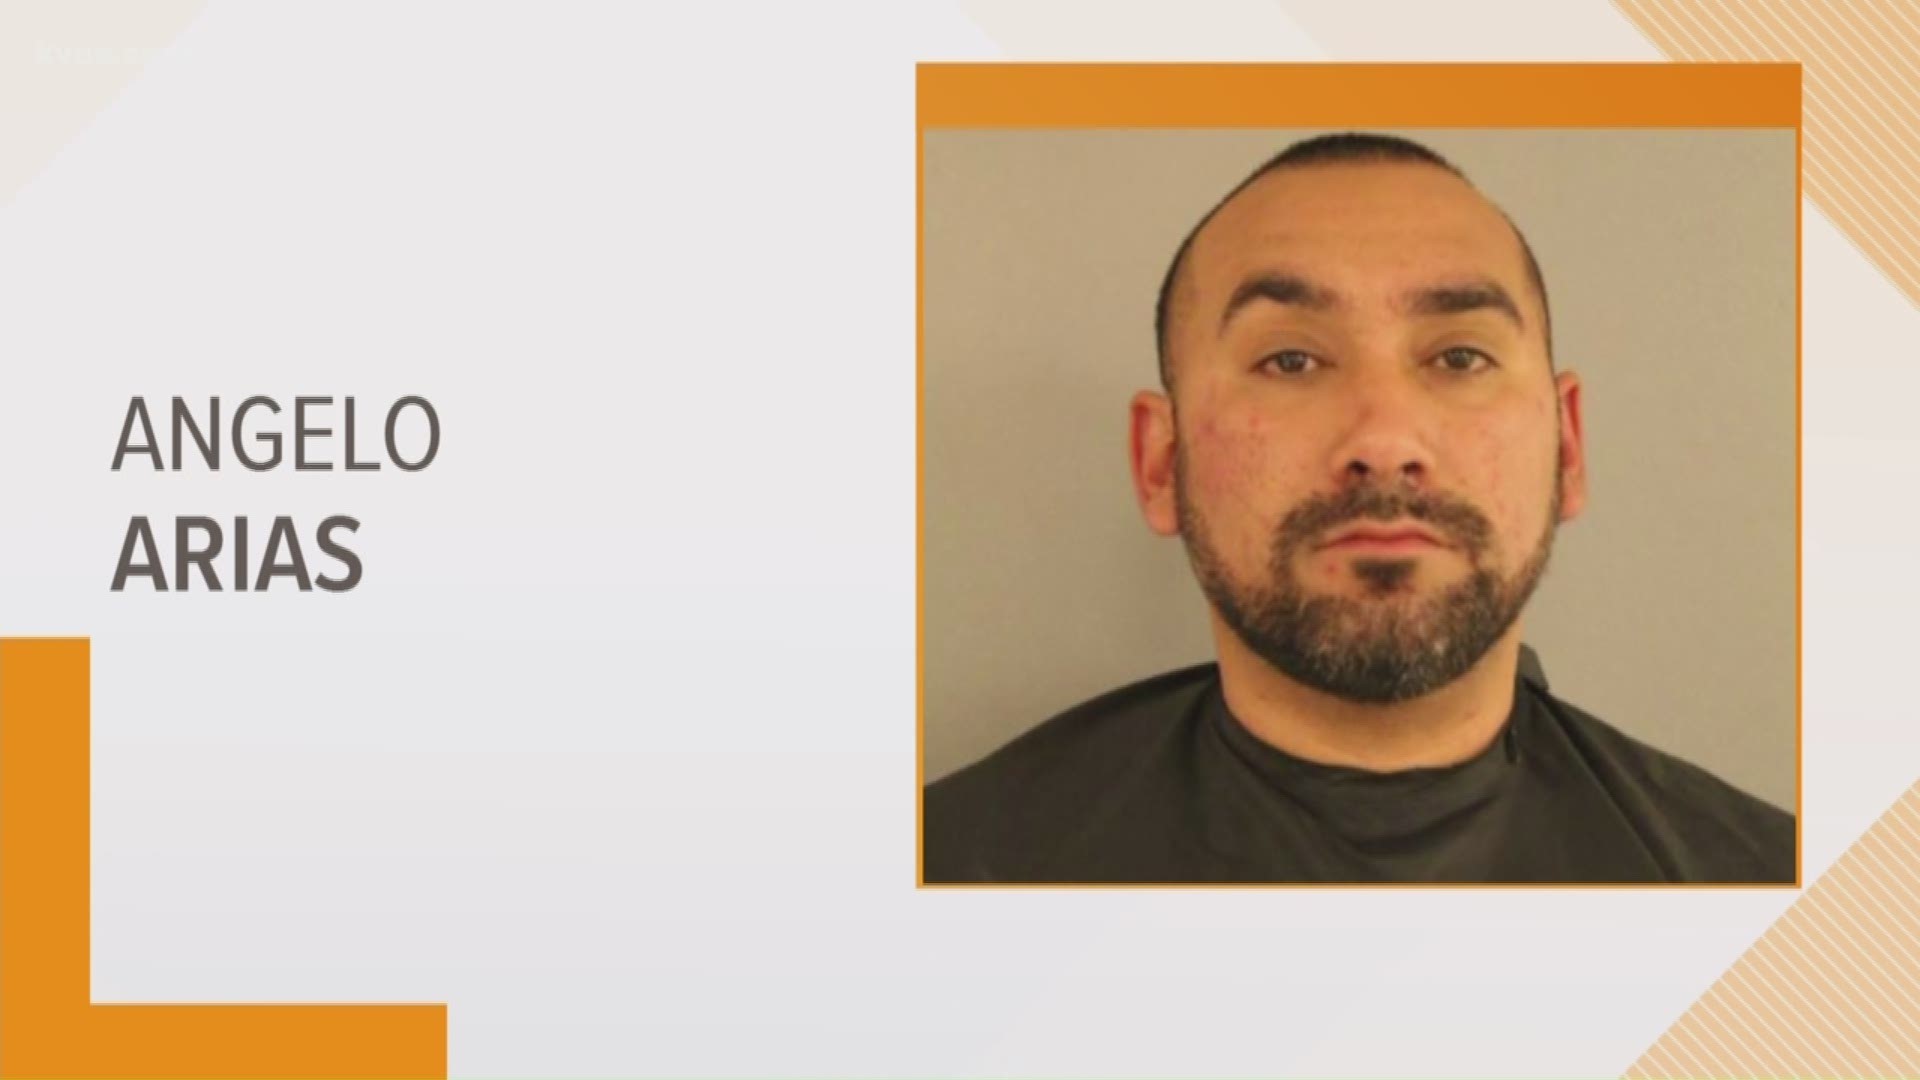 A California man is now in a Central Texas jail accused of selling fake honda generators.